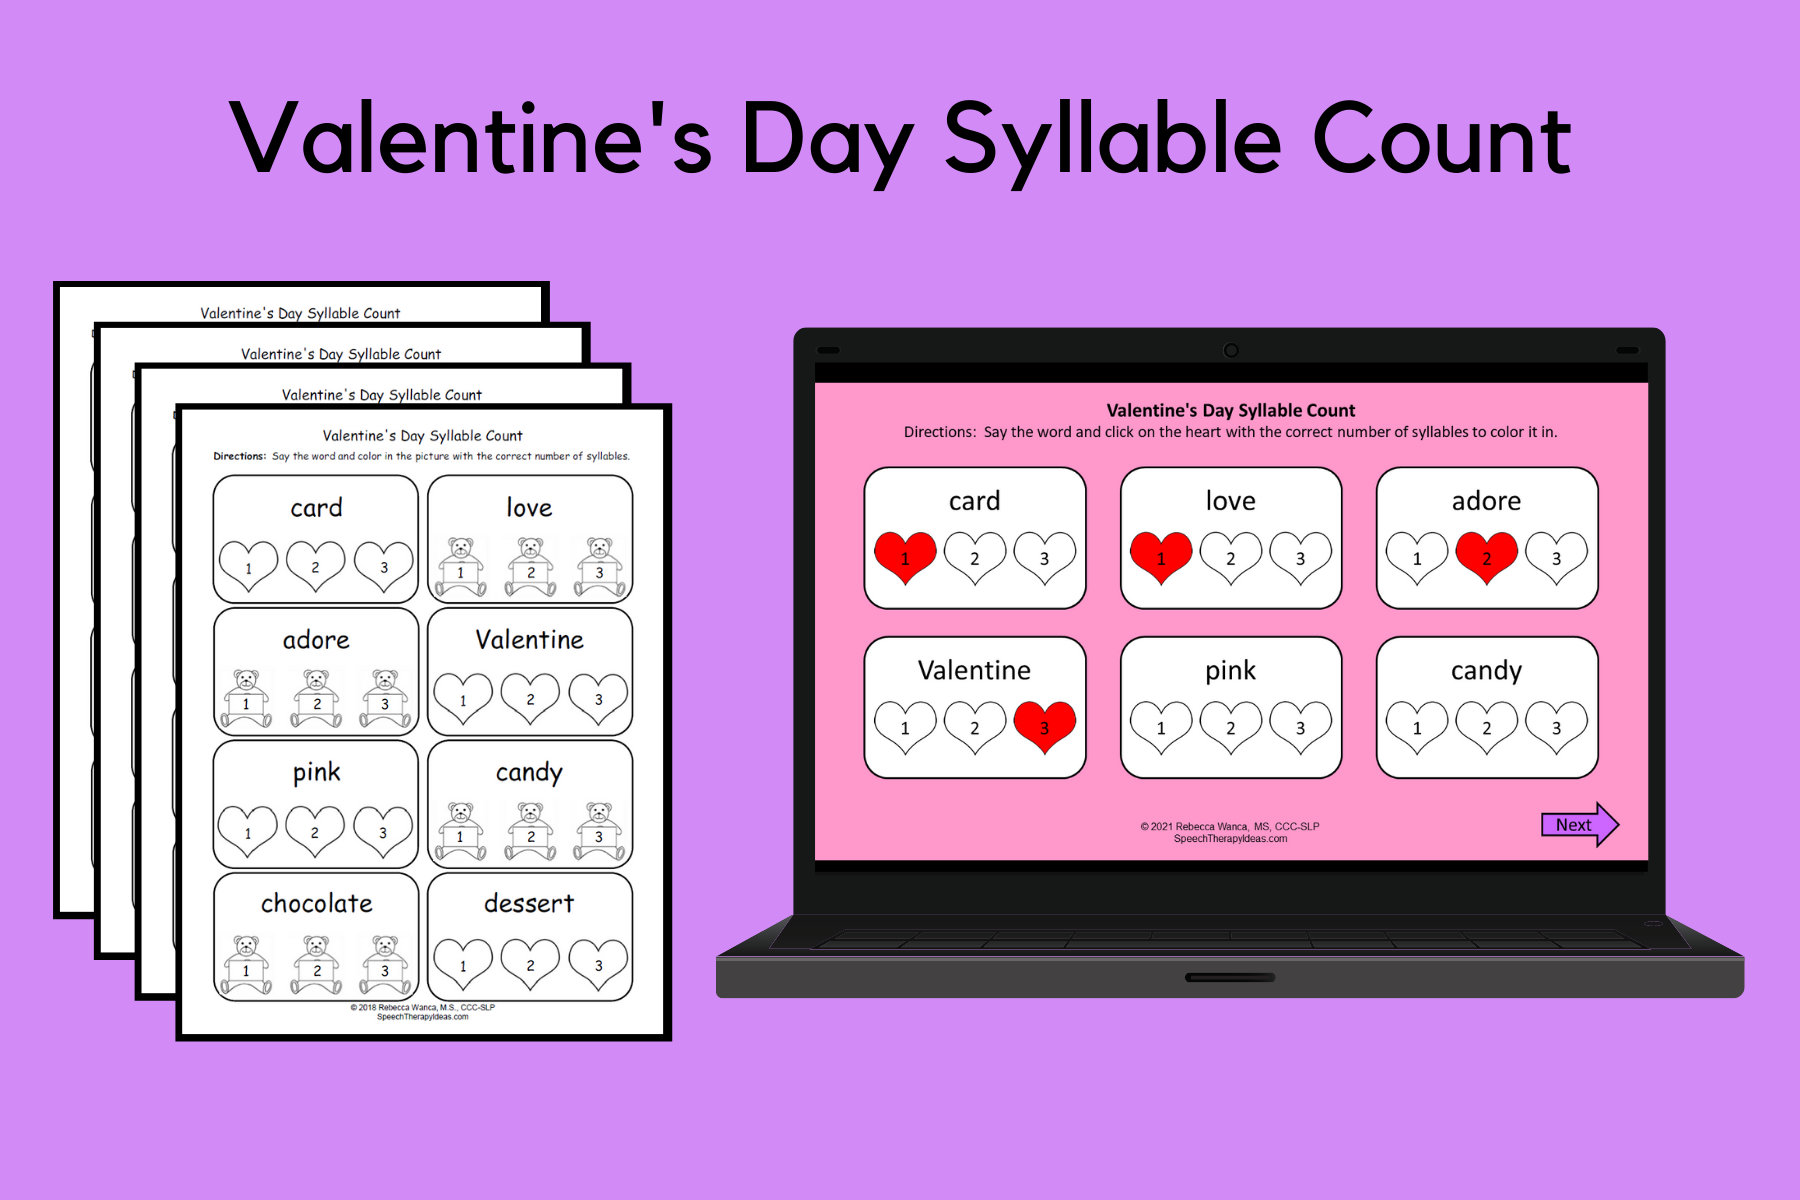 Valentine’s Day Syllable Count